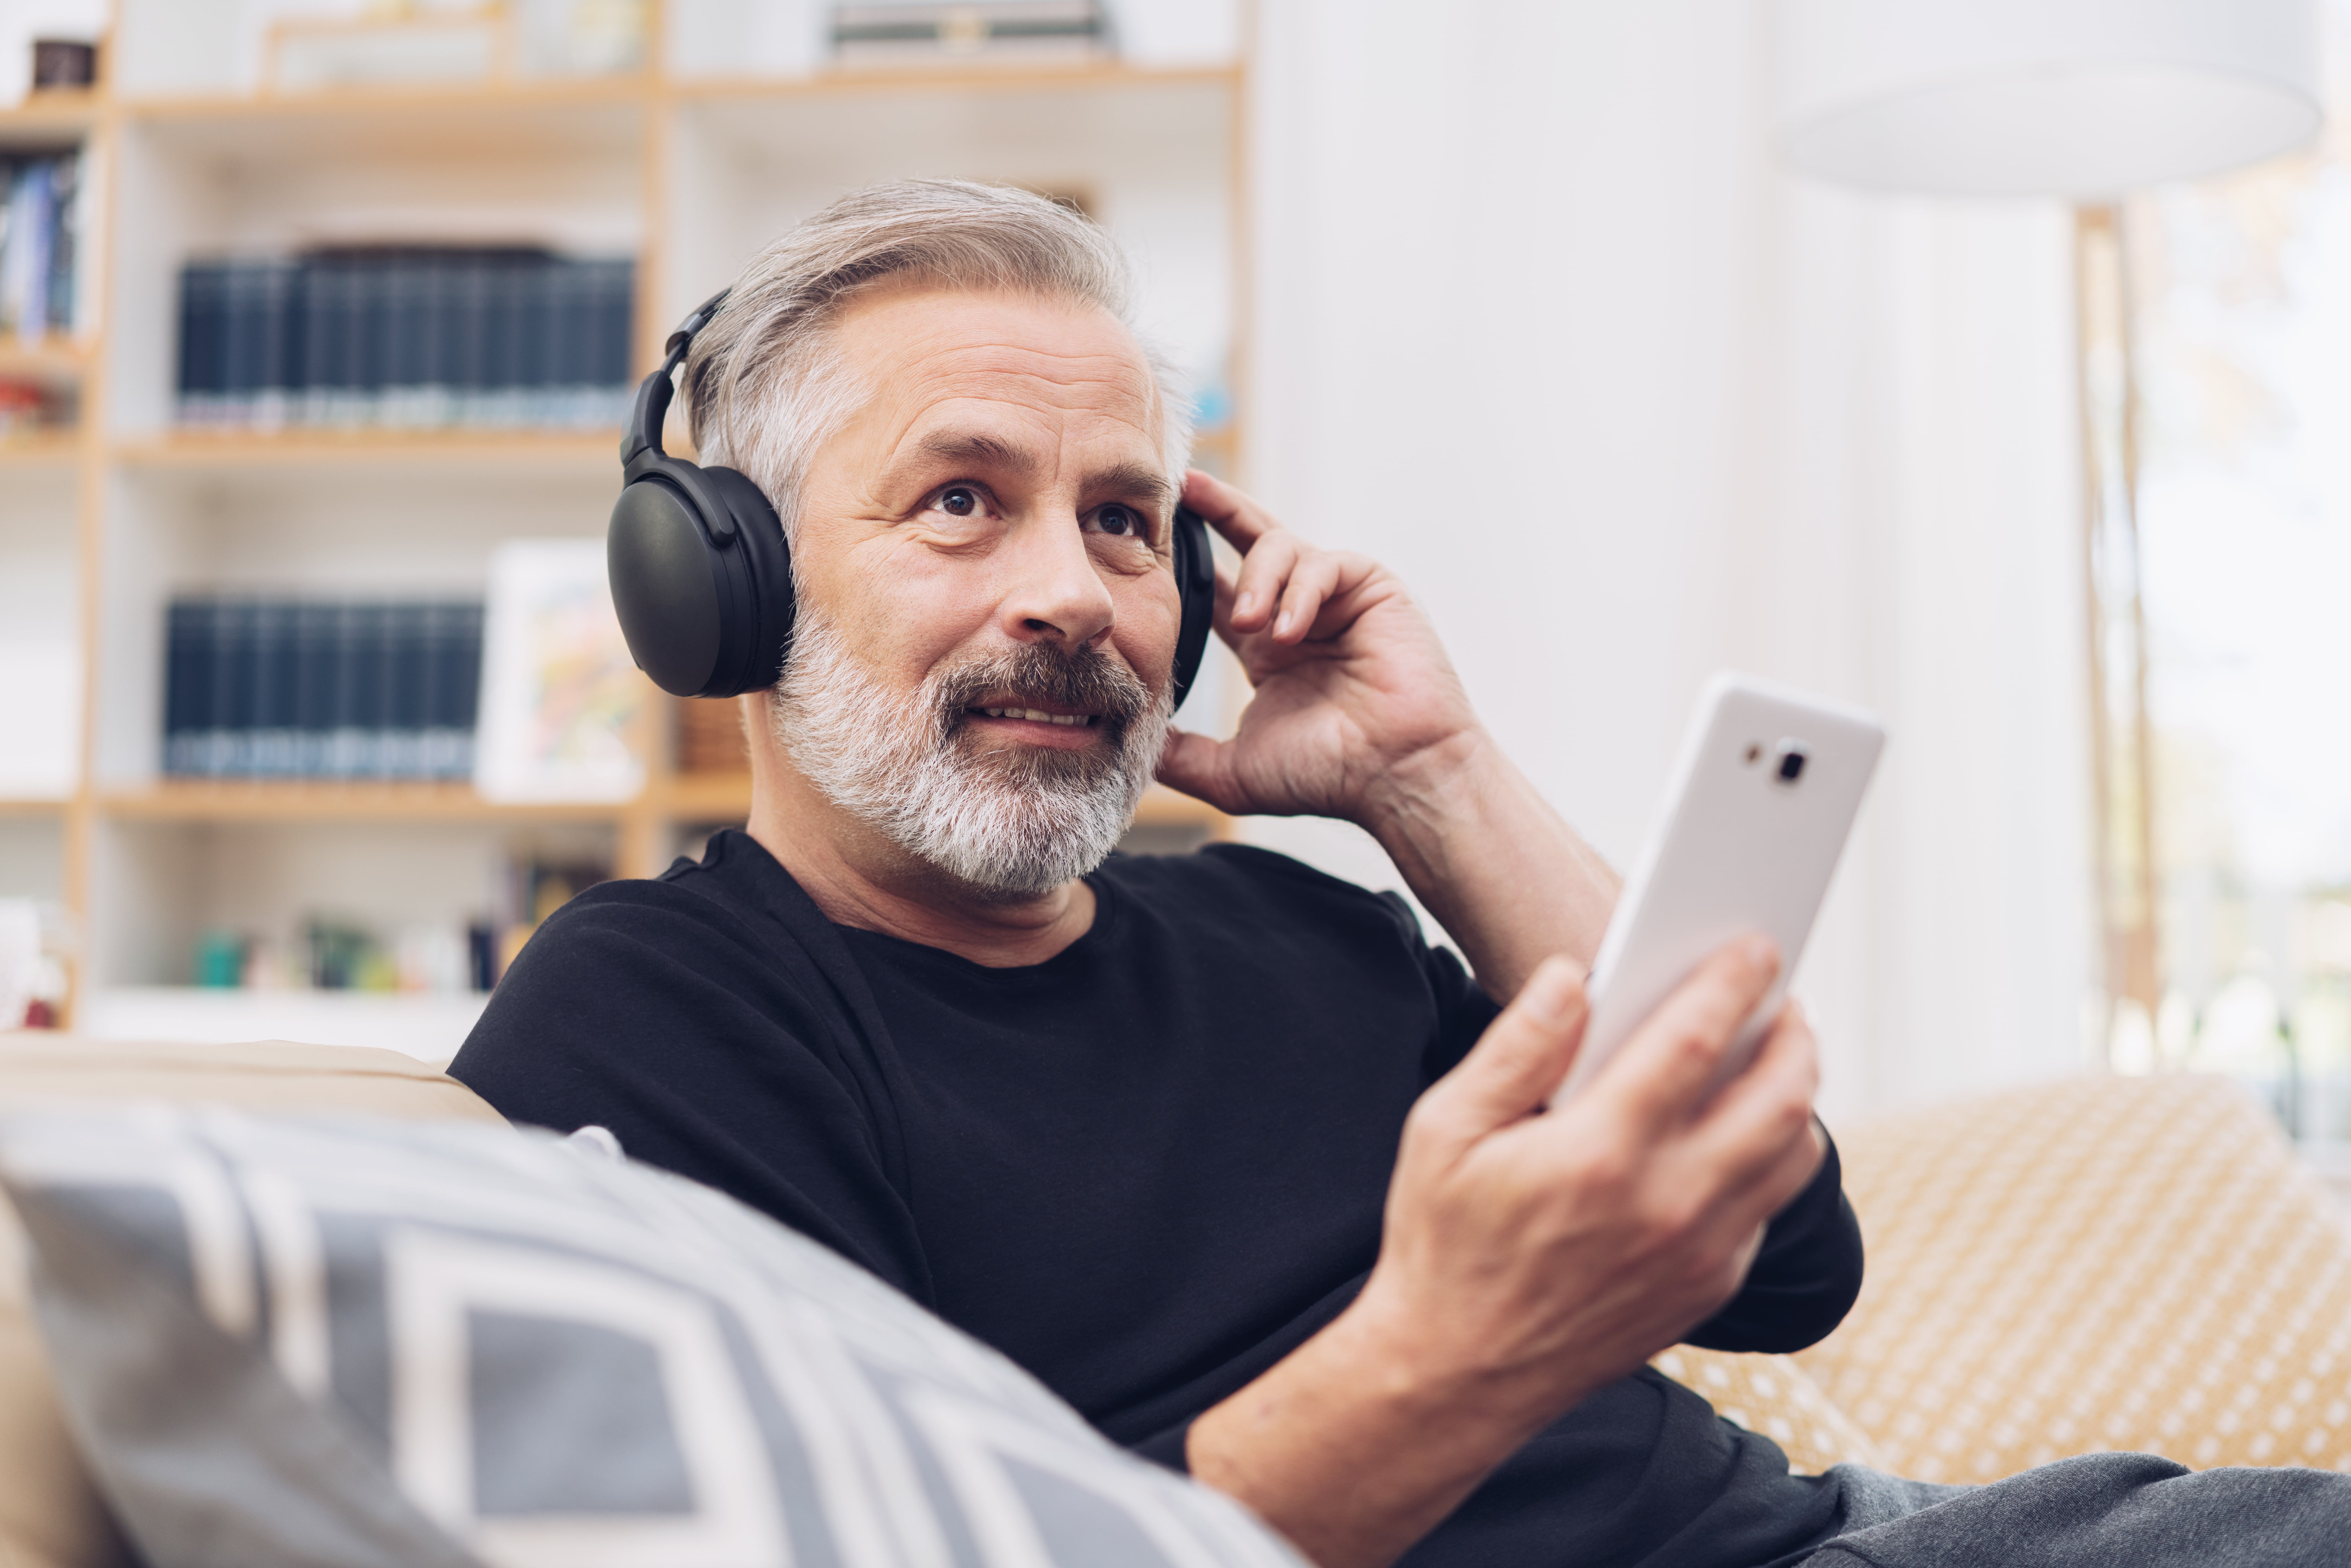 Playlist for Life - Connecting Through Music: The Benefits of Music for Dementia